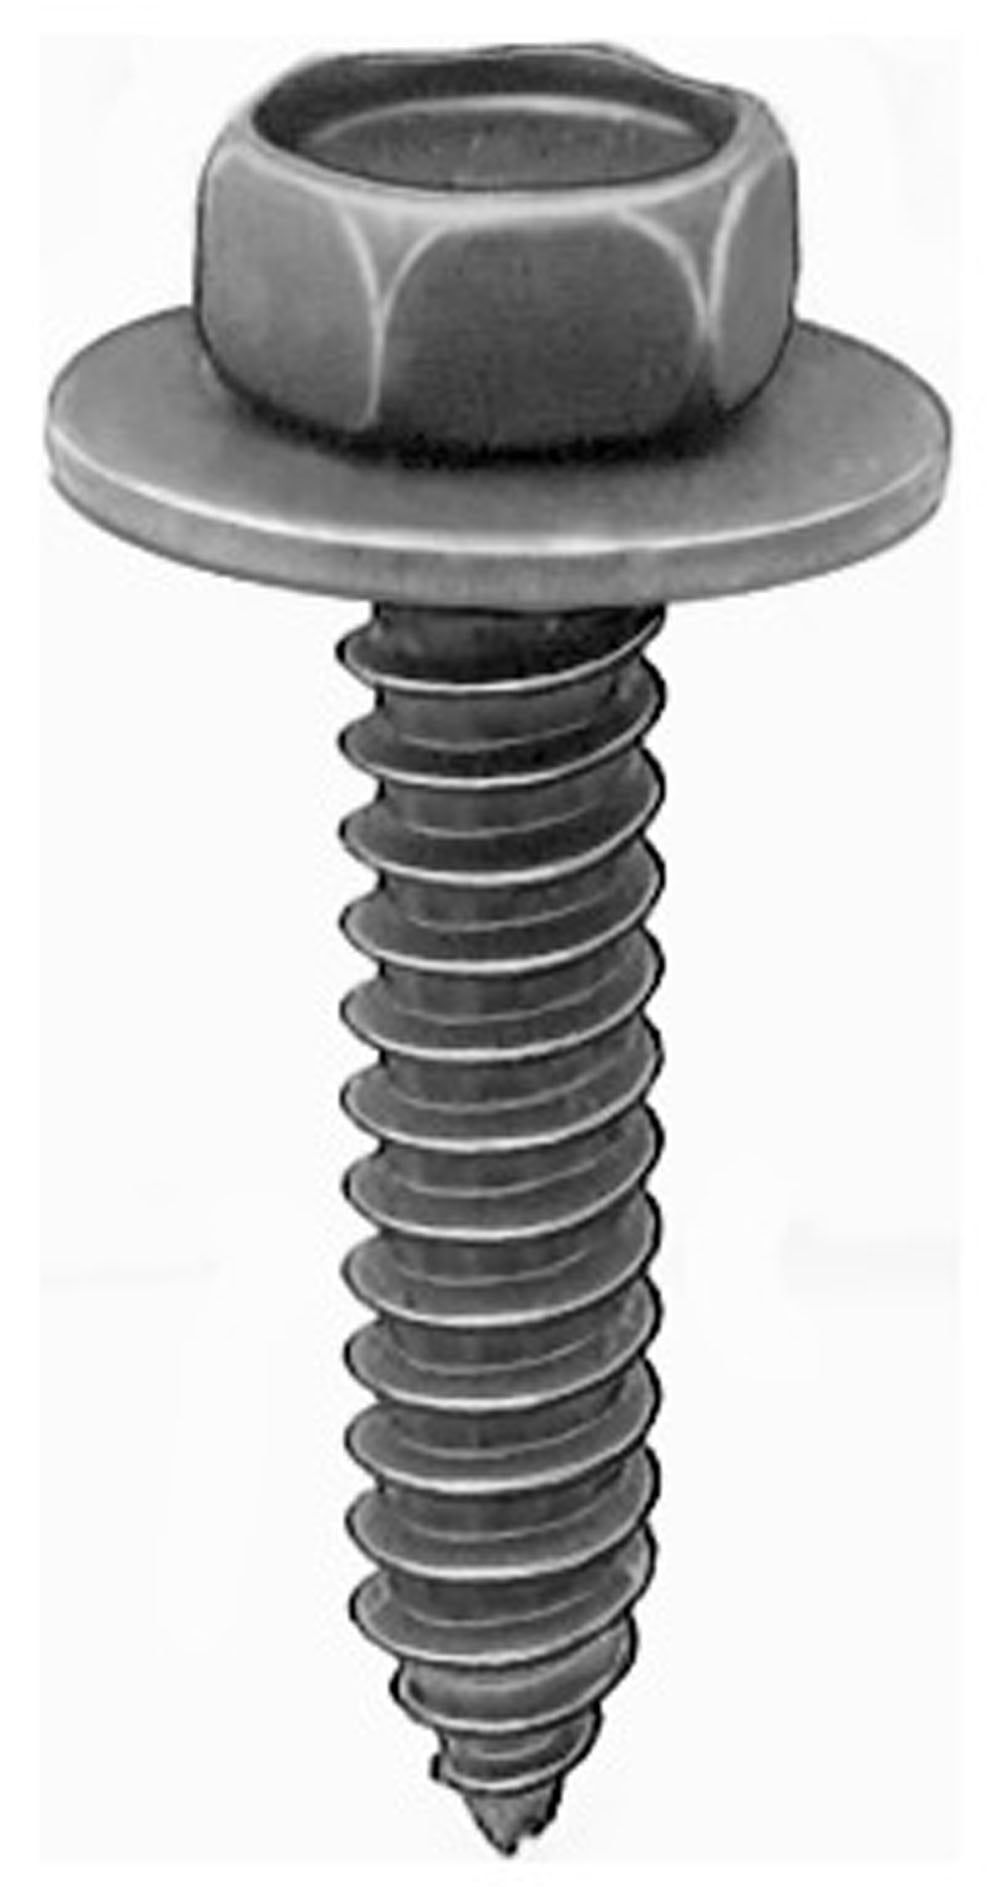 Clipsandfasteners Inc 50 6.3-1.81 X 30mm Hex Head Sems Tapping Screws 